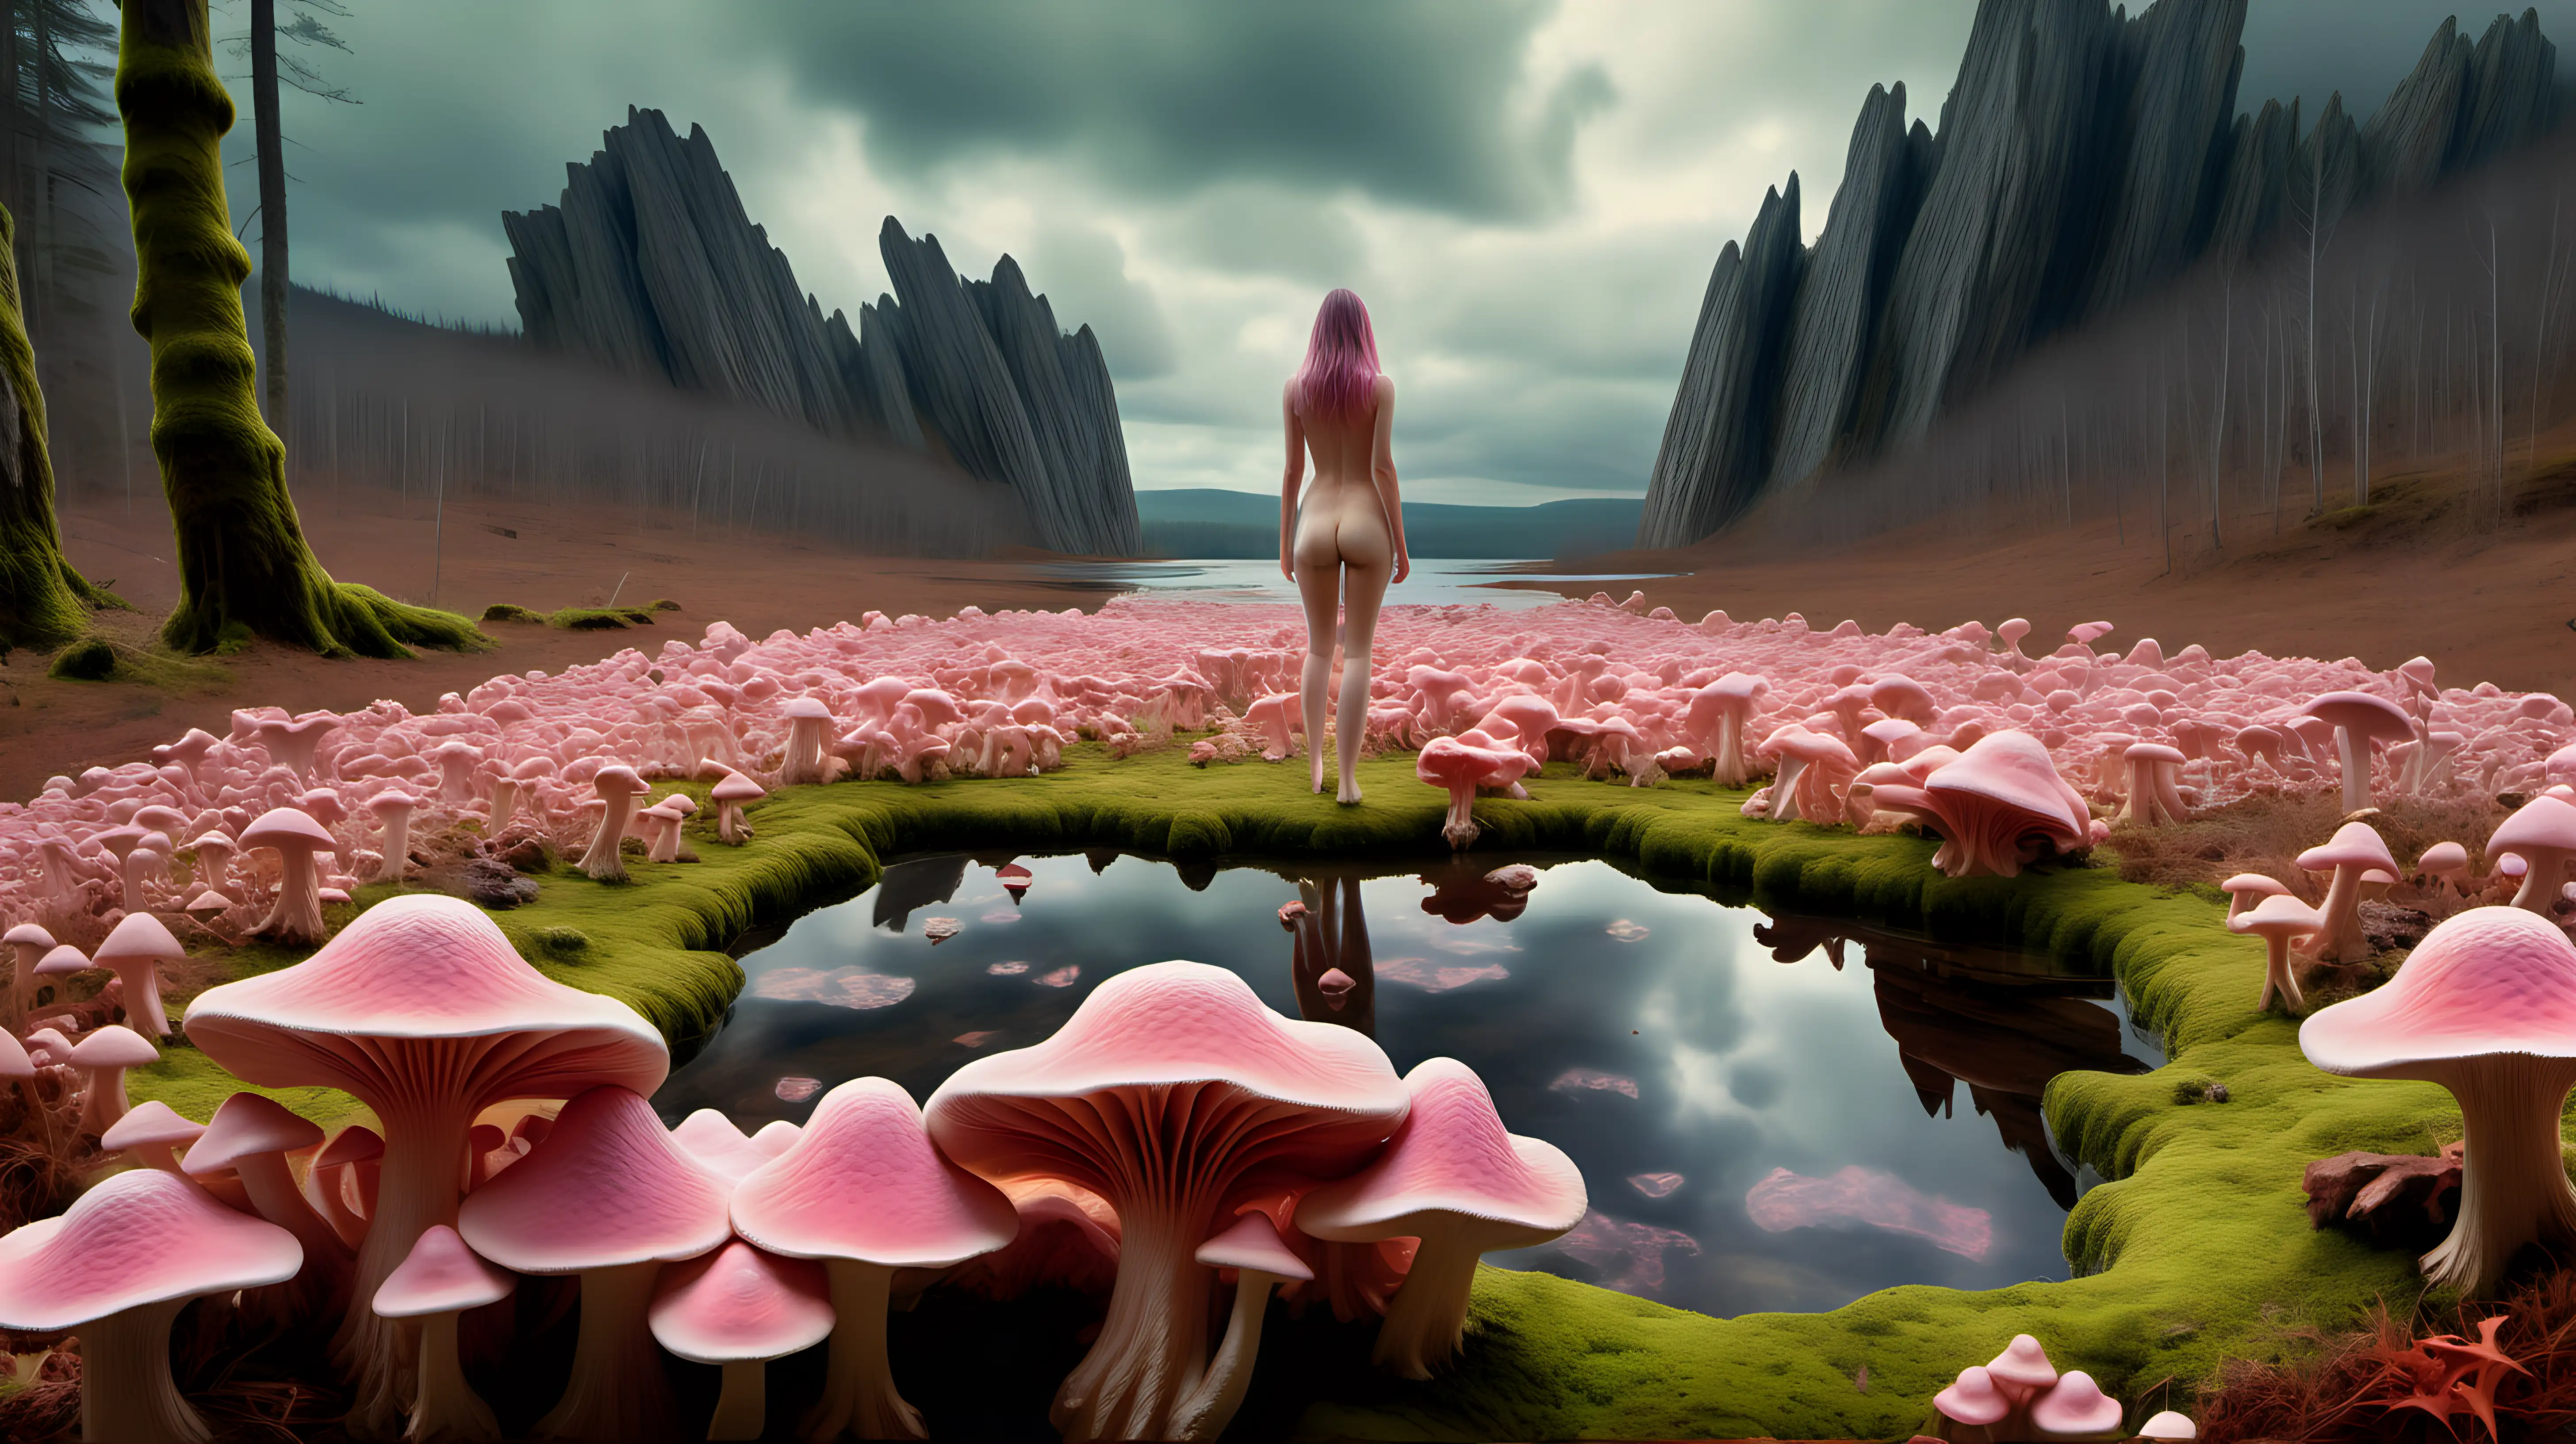 Ethereal Psychedelic Landscape Featuring Nude Woman and Crystalline Minerals